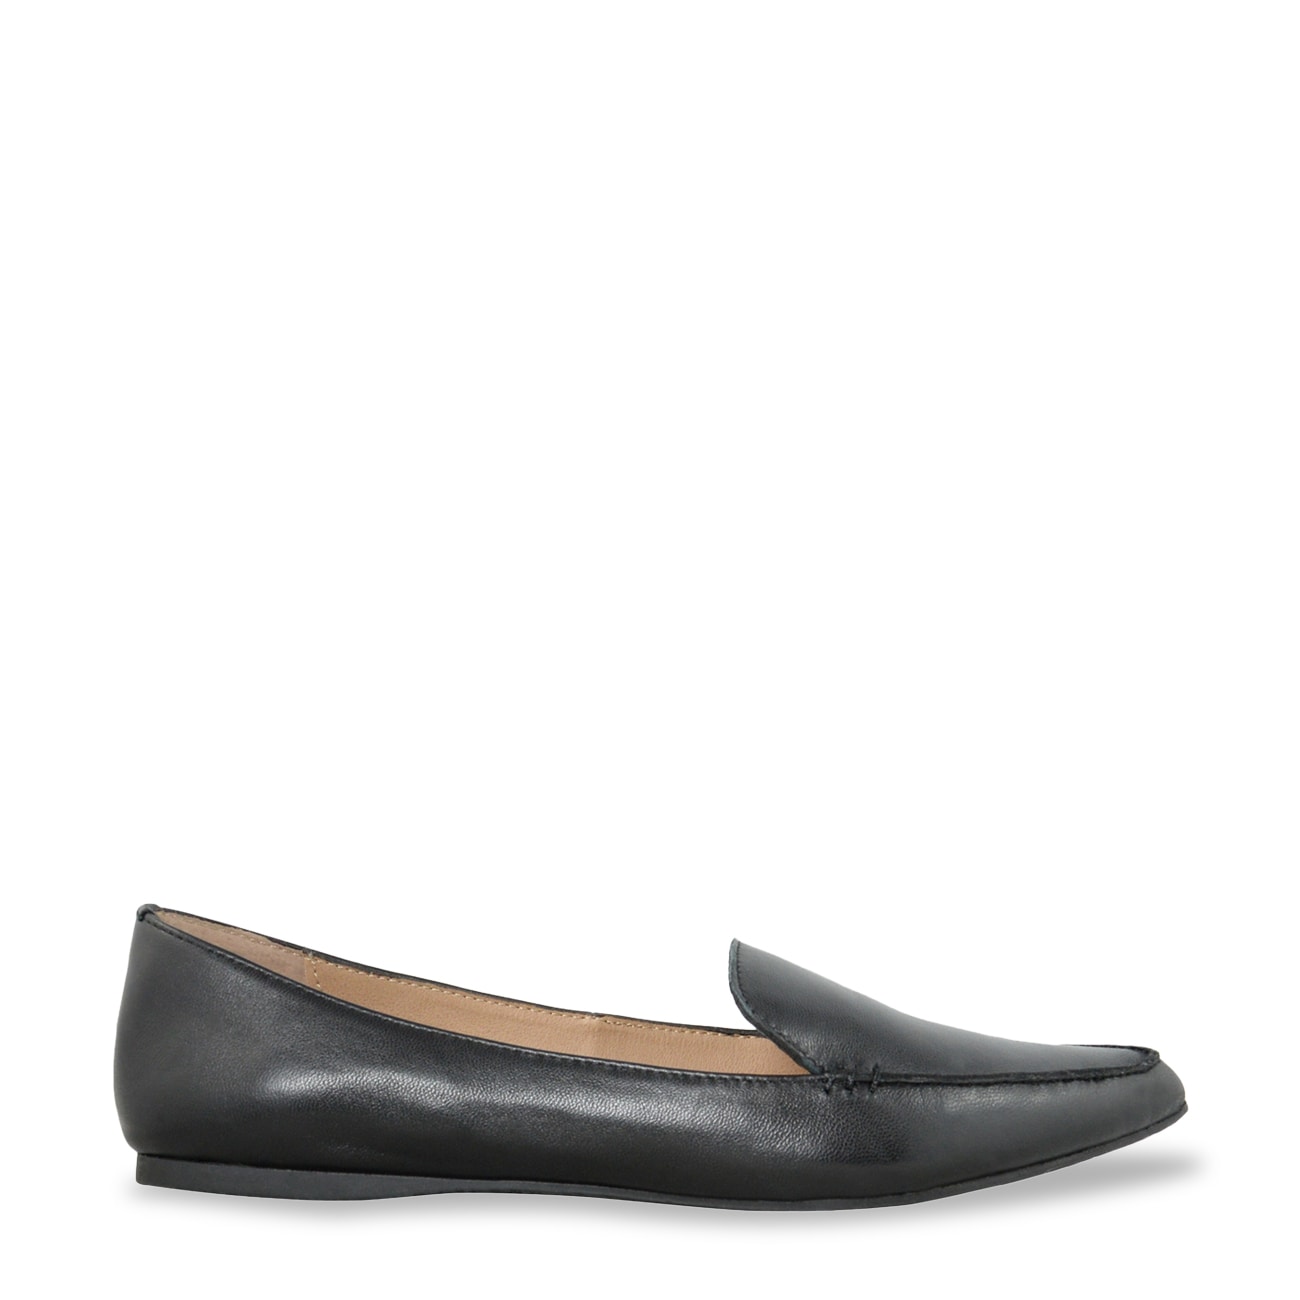 Steve Madden Feather Loafer | The Shoe Company